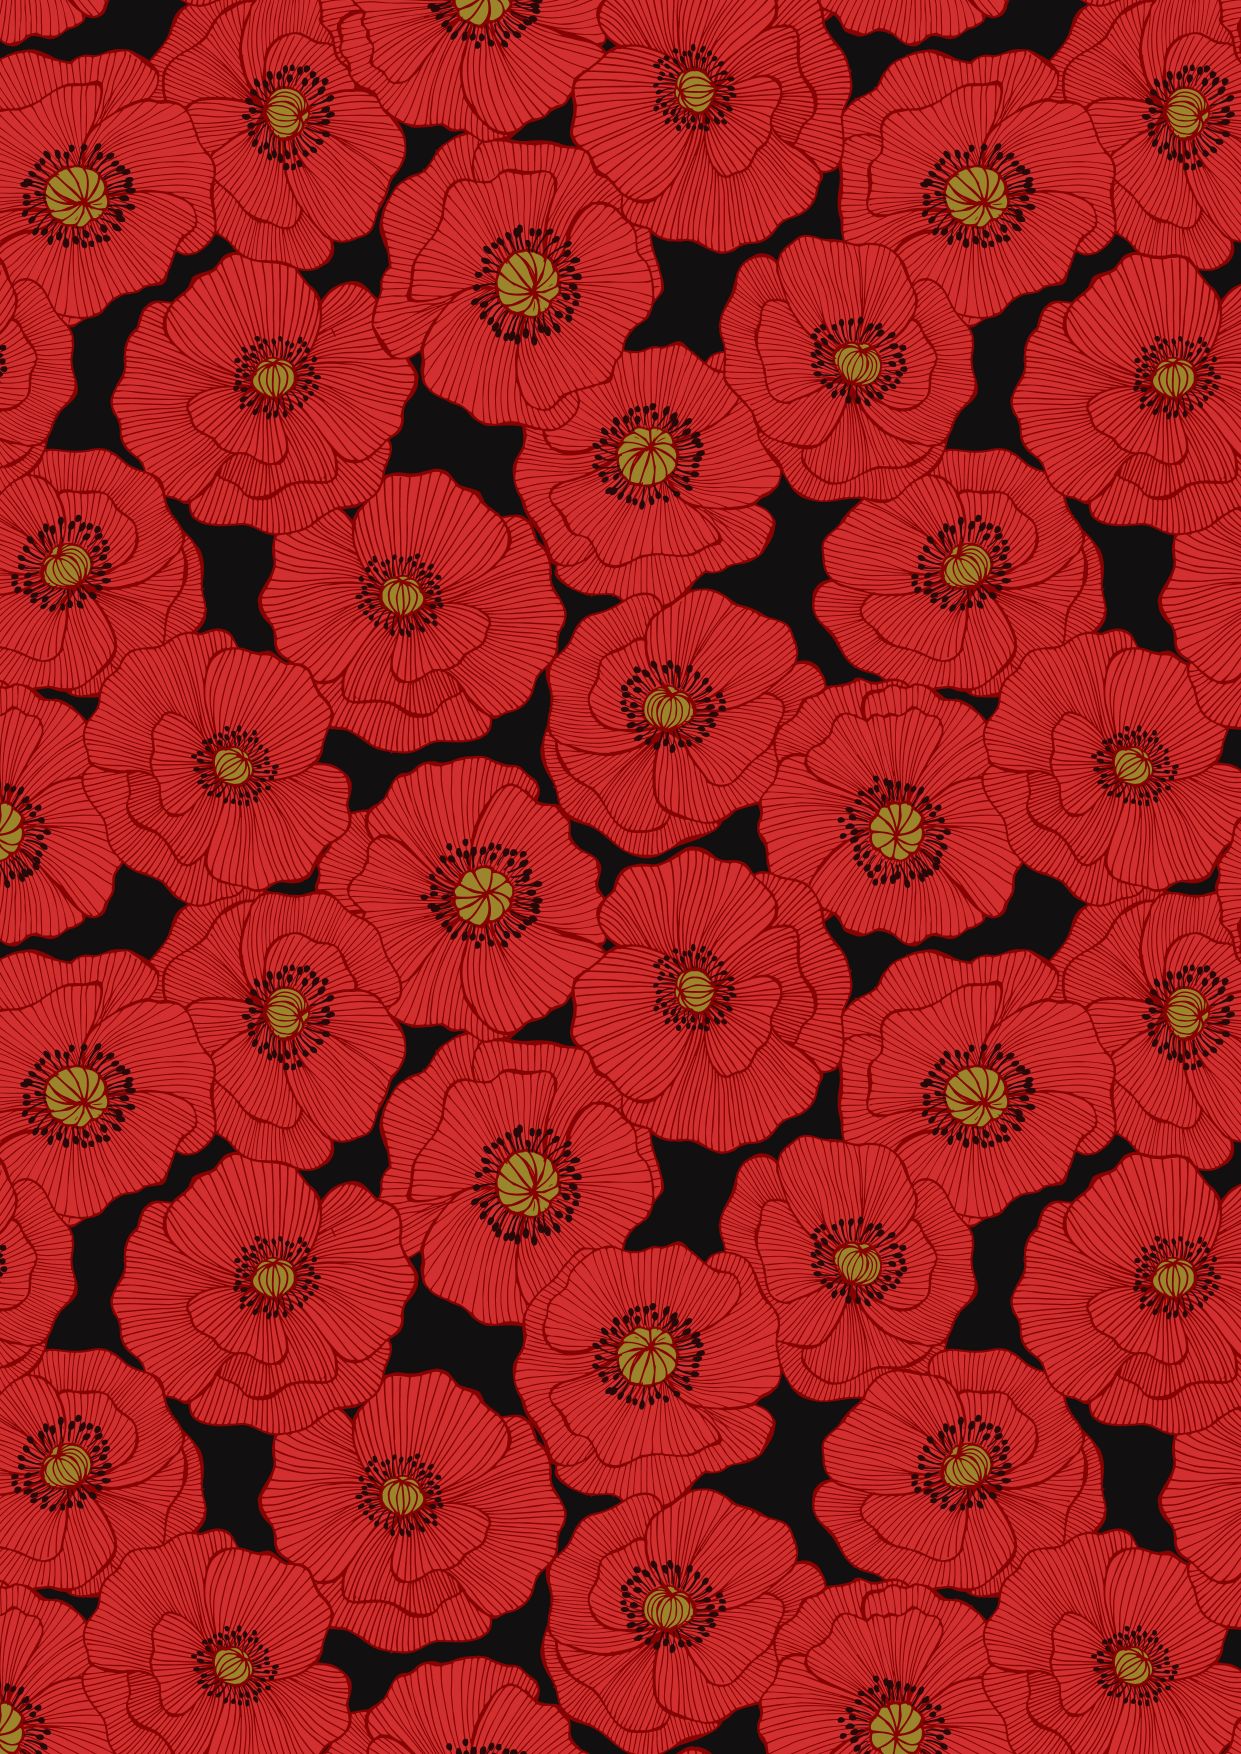 Lewis & Irene - Poppies - A554.3 - Large Poppy on Black Fabric